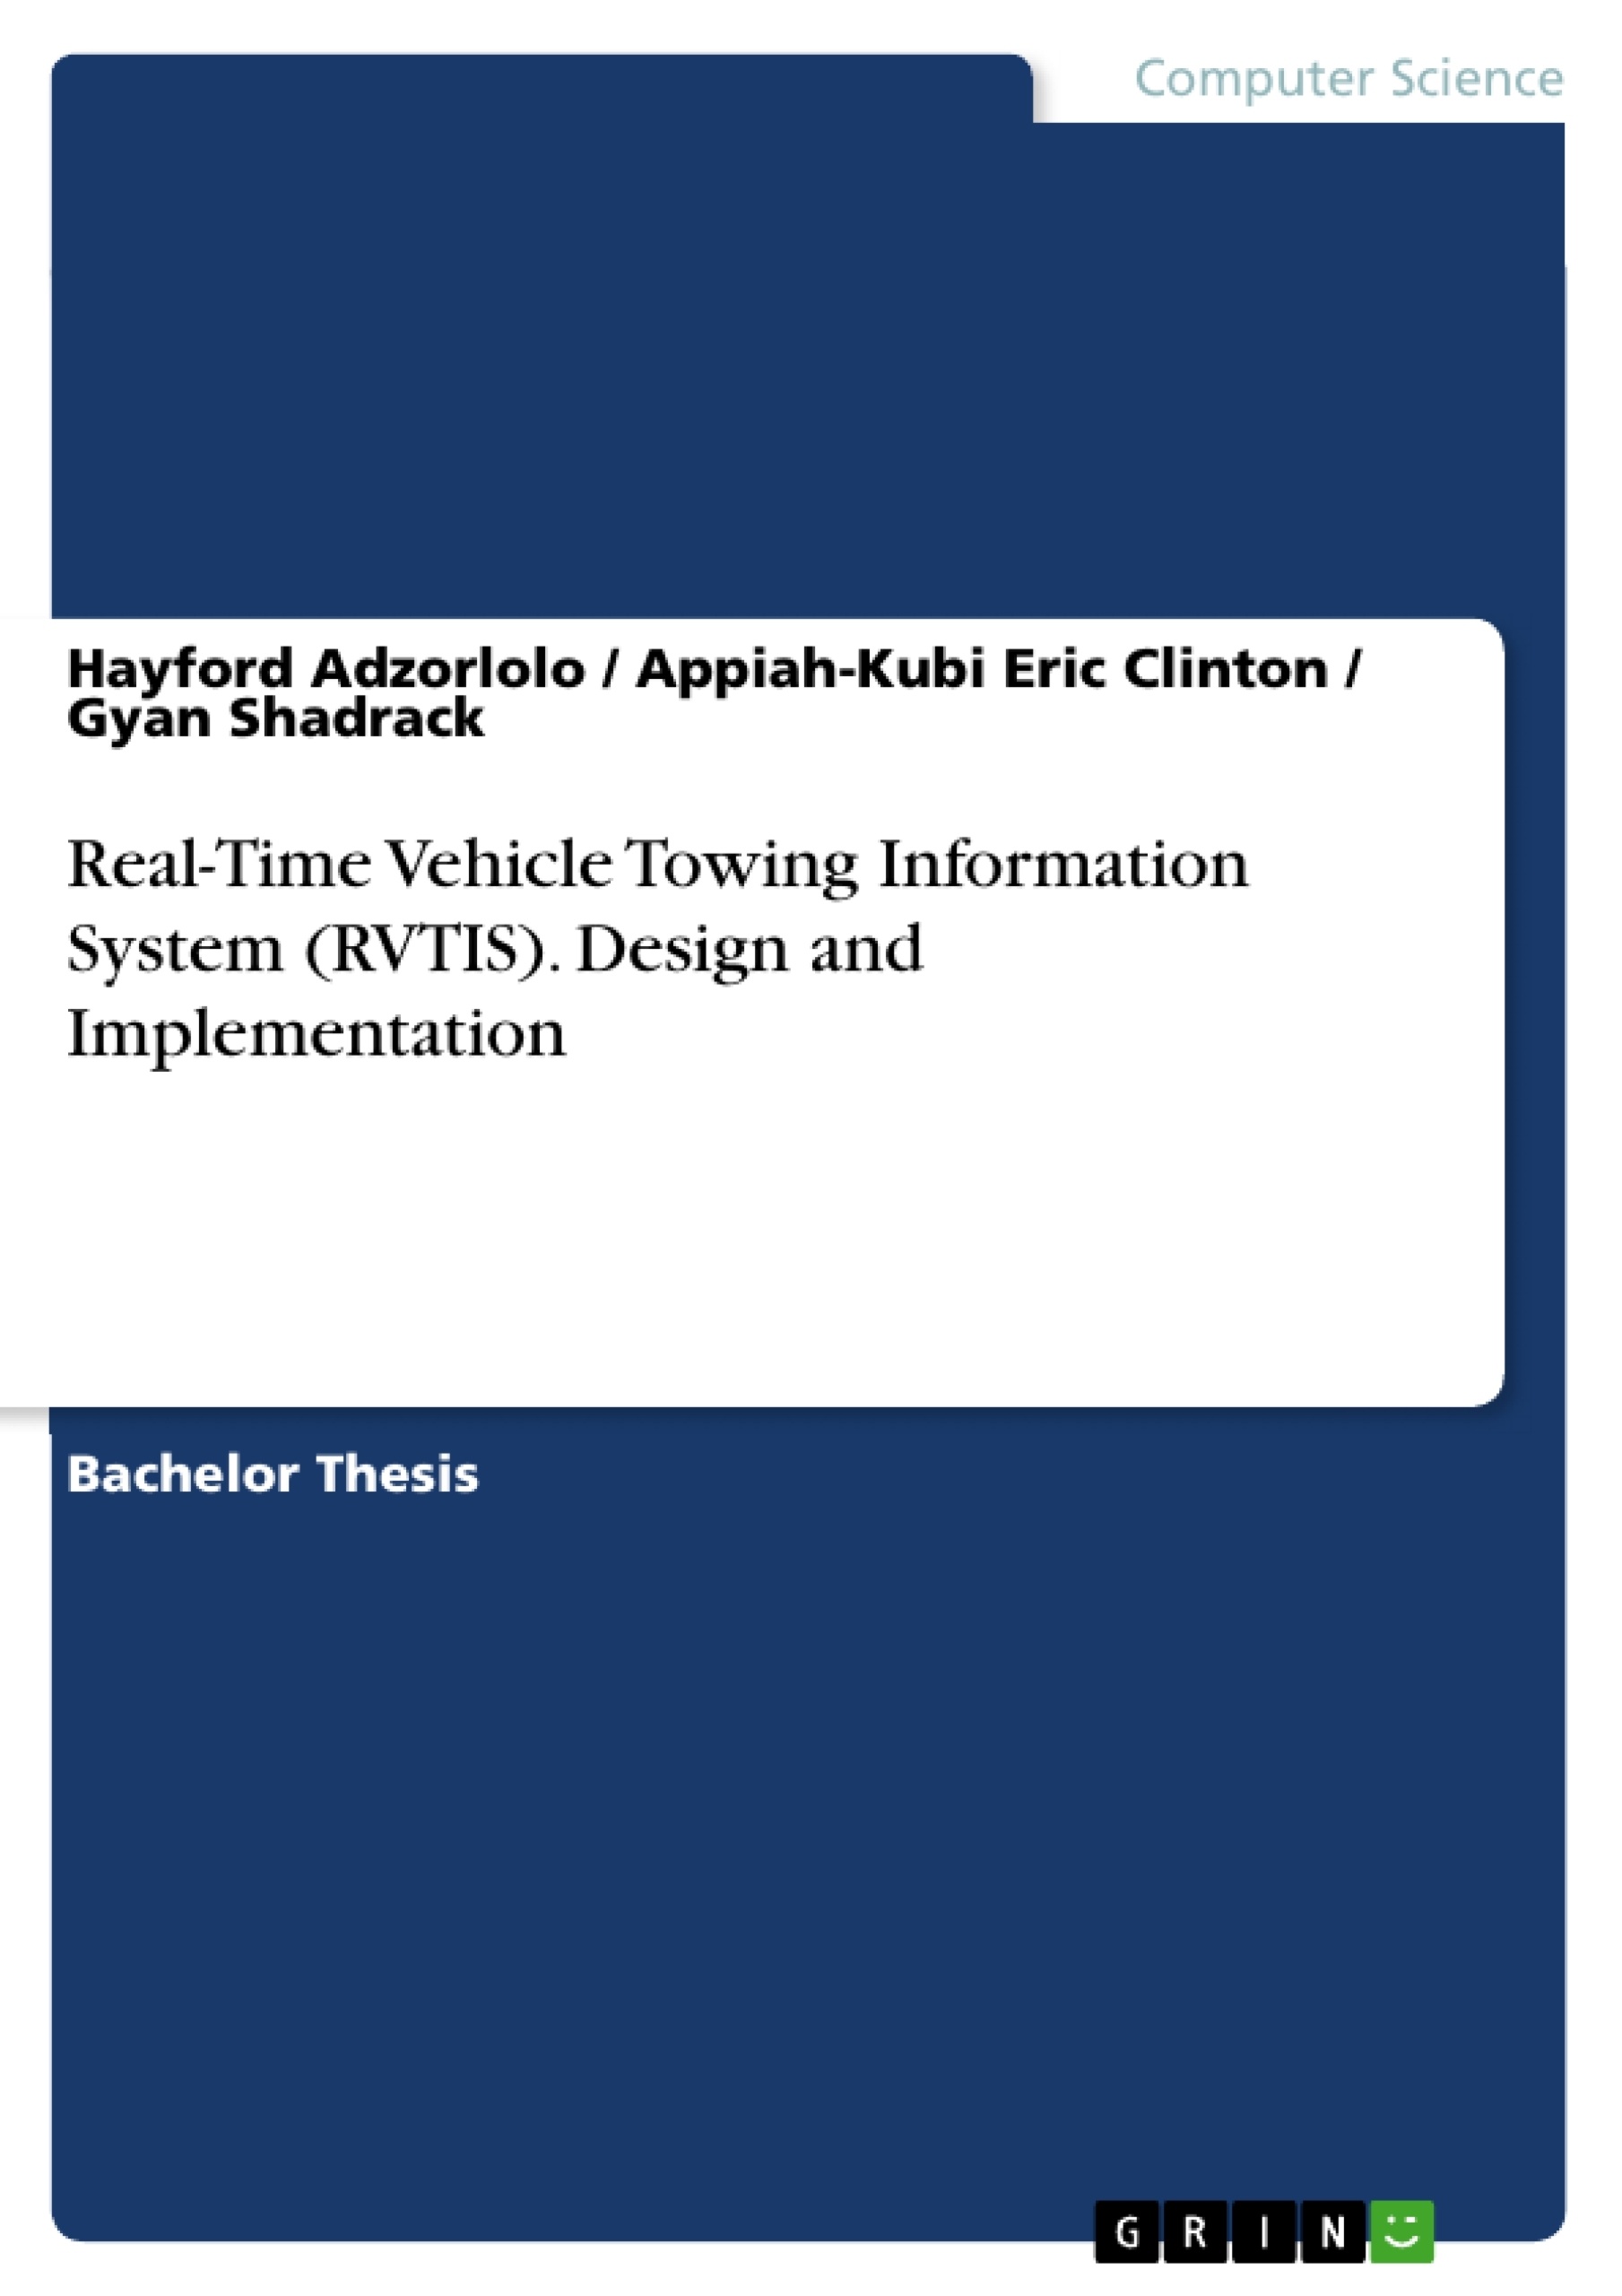 Title: Real-Time Vehicle Towing Information System (RVTIS). Design and Implementation